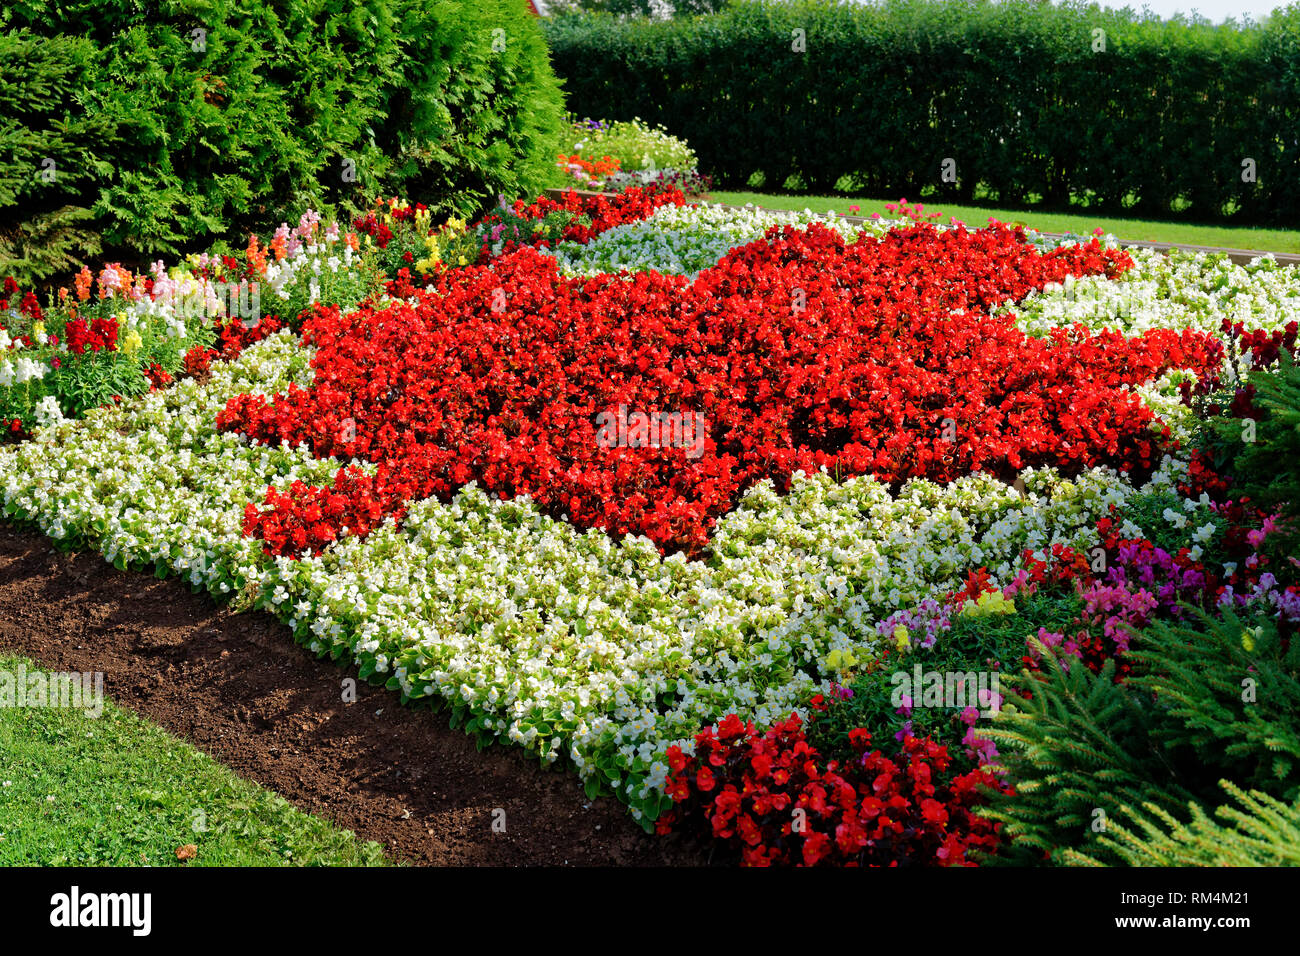 Begonia plants form a Canada flag flower bed. Stock Photo